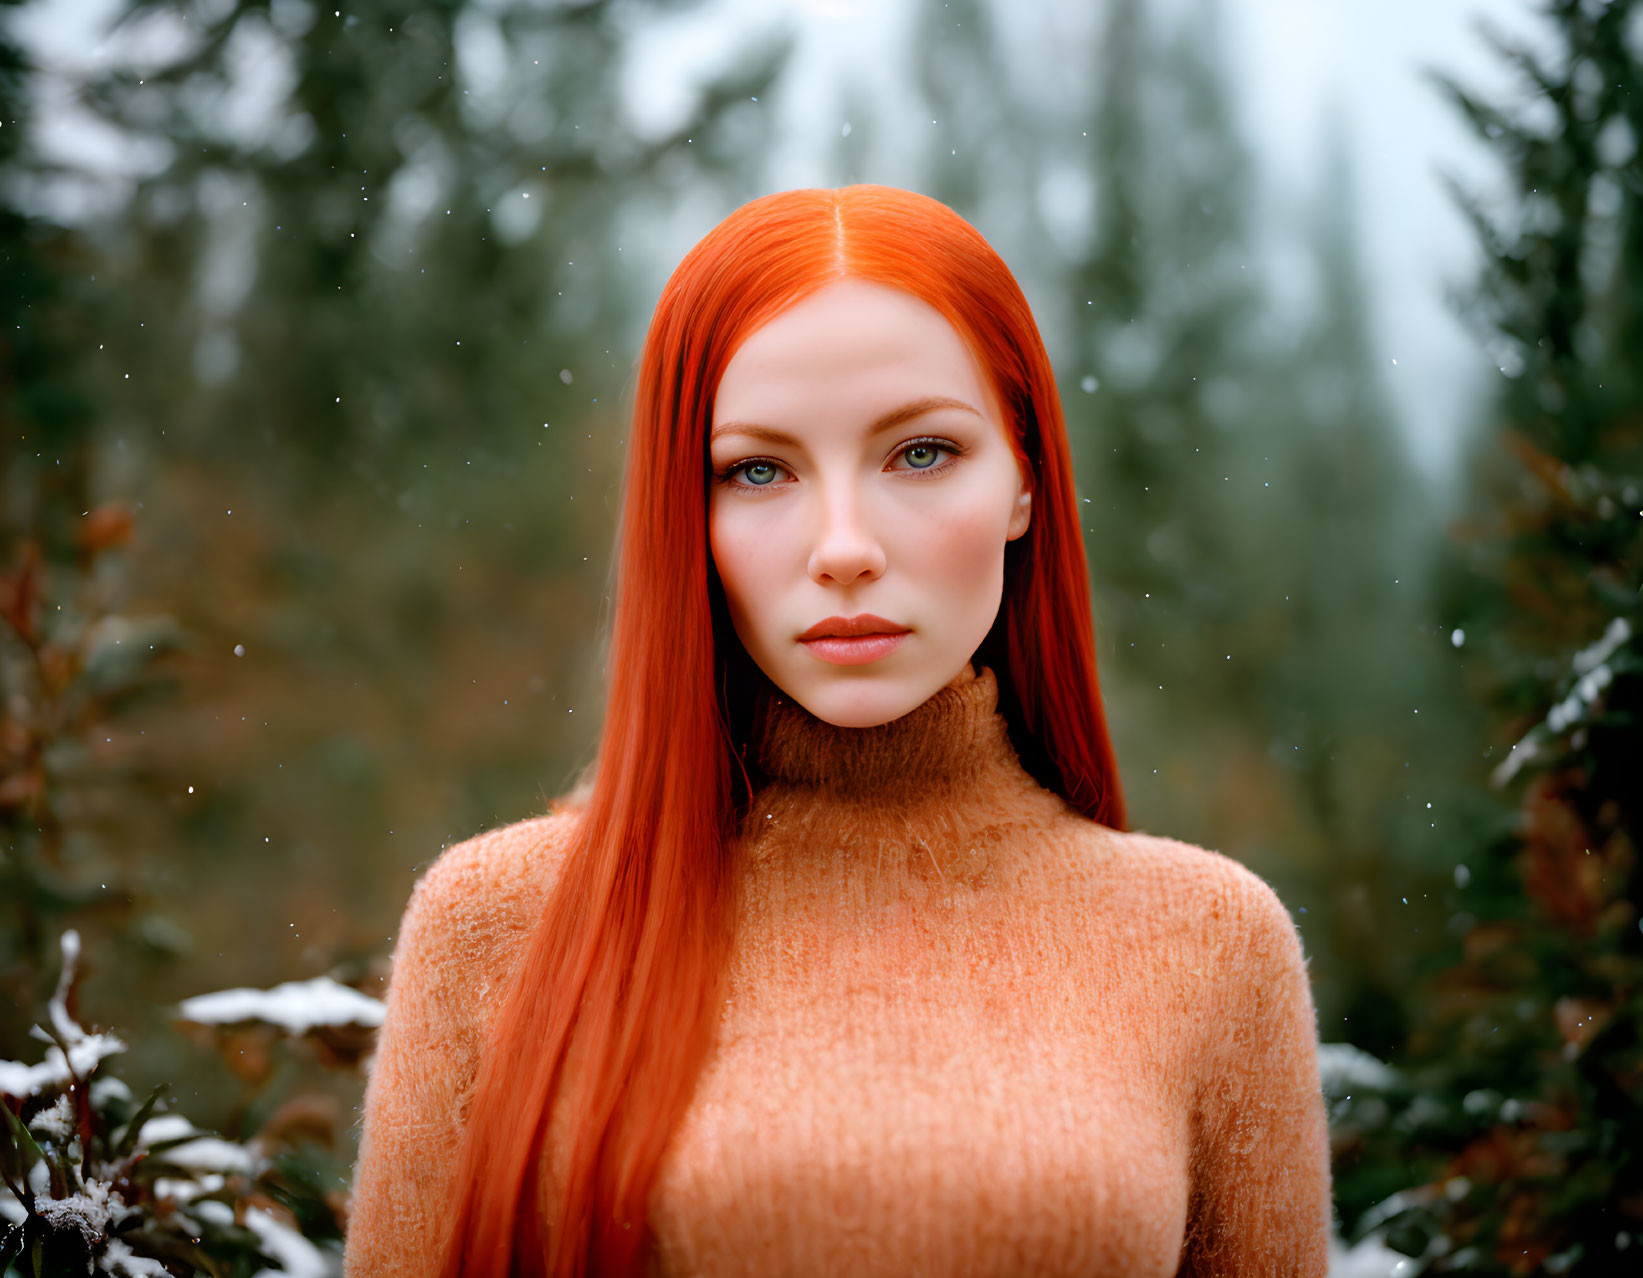 Red-haired woman in orange turtleneck in snowy forest